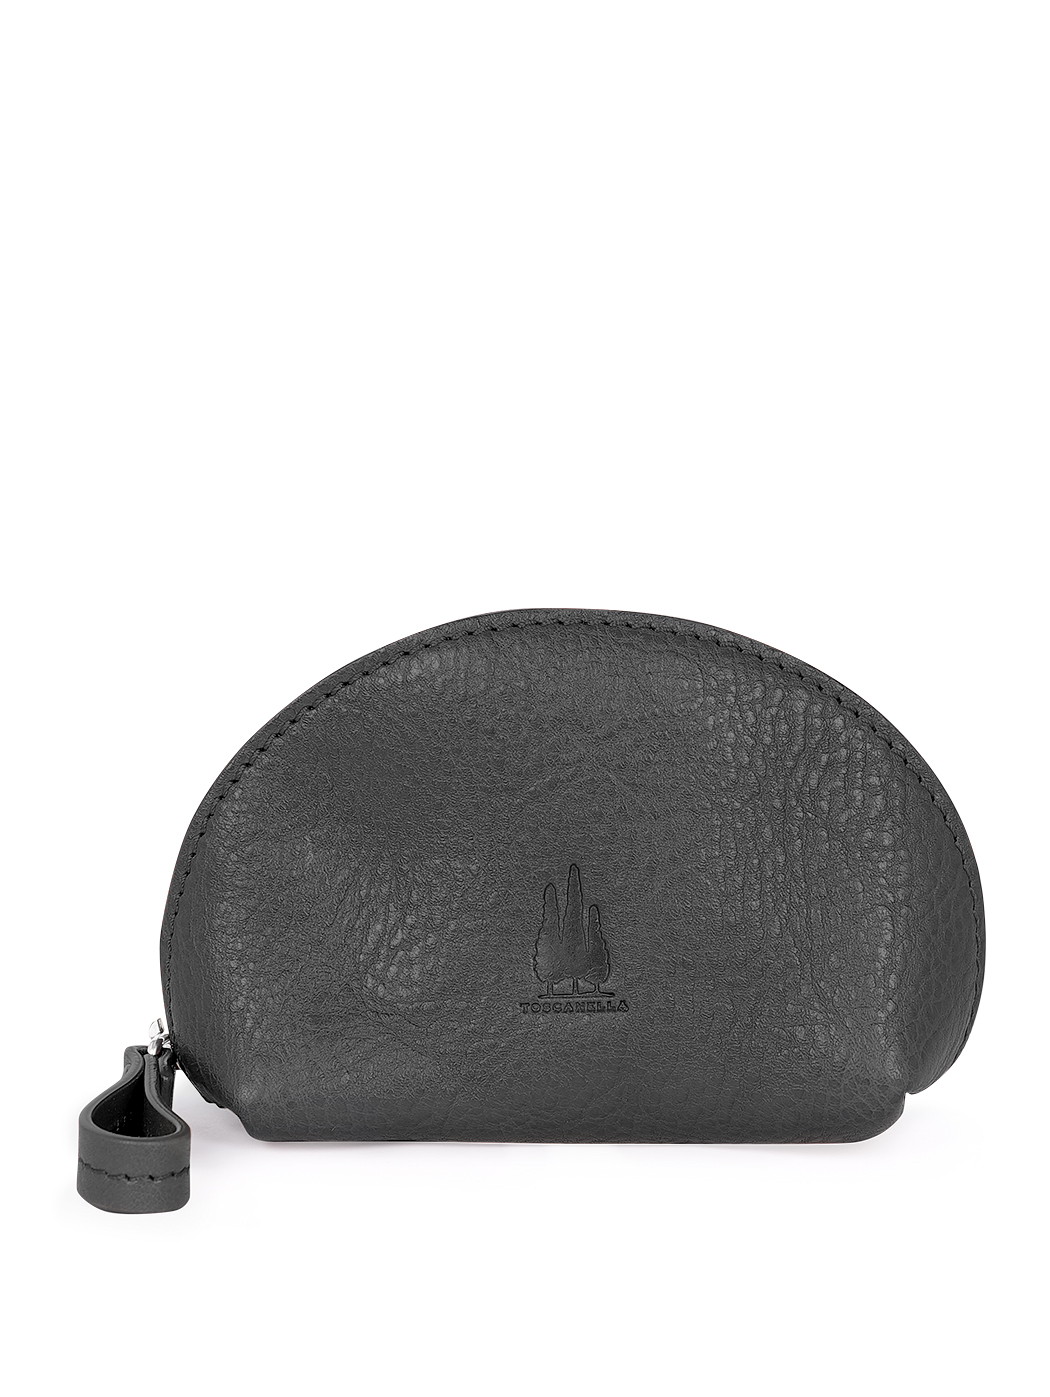 Women's Clamshell Hold-all Pouch in Leather Black